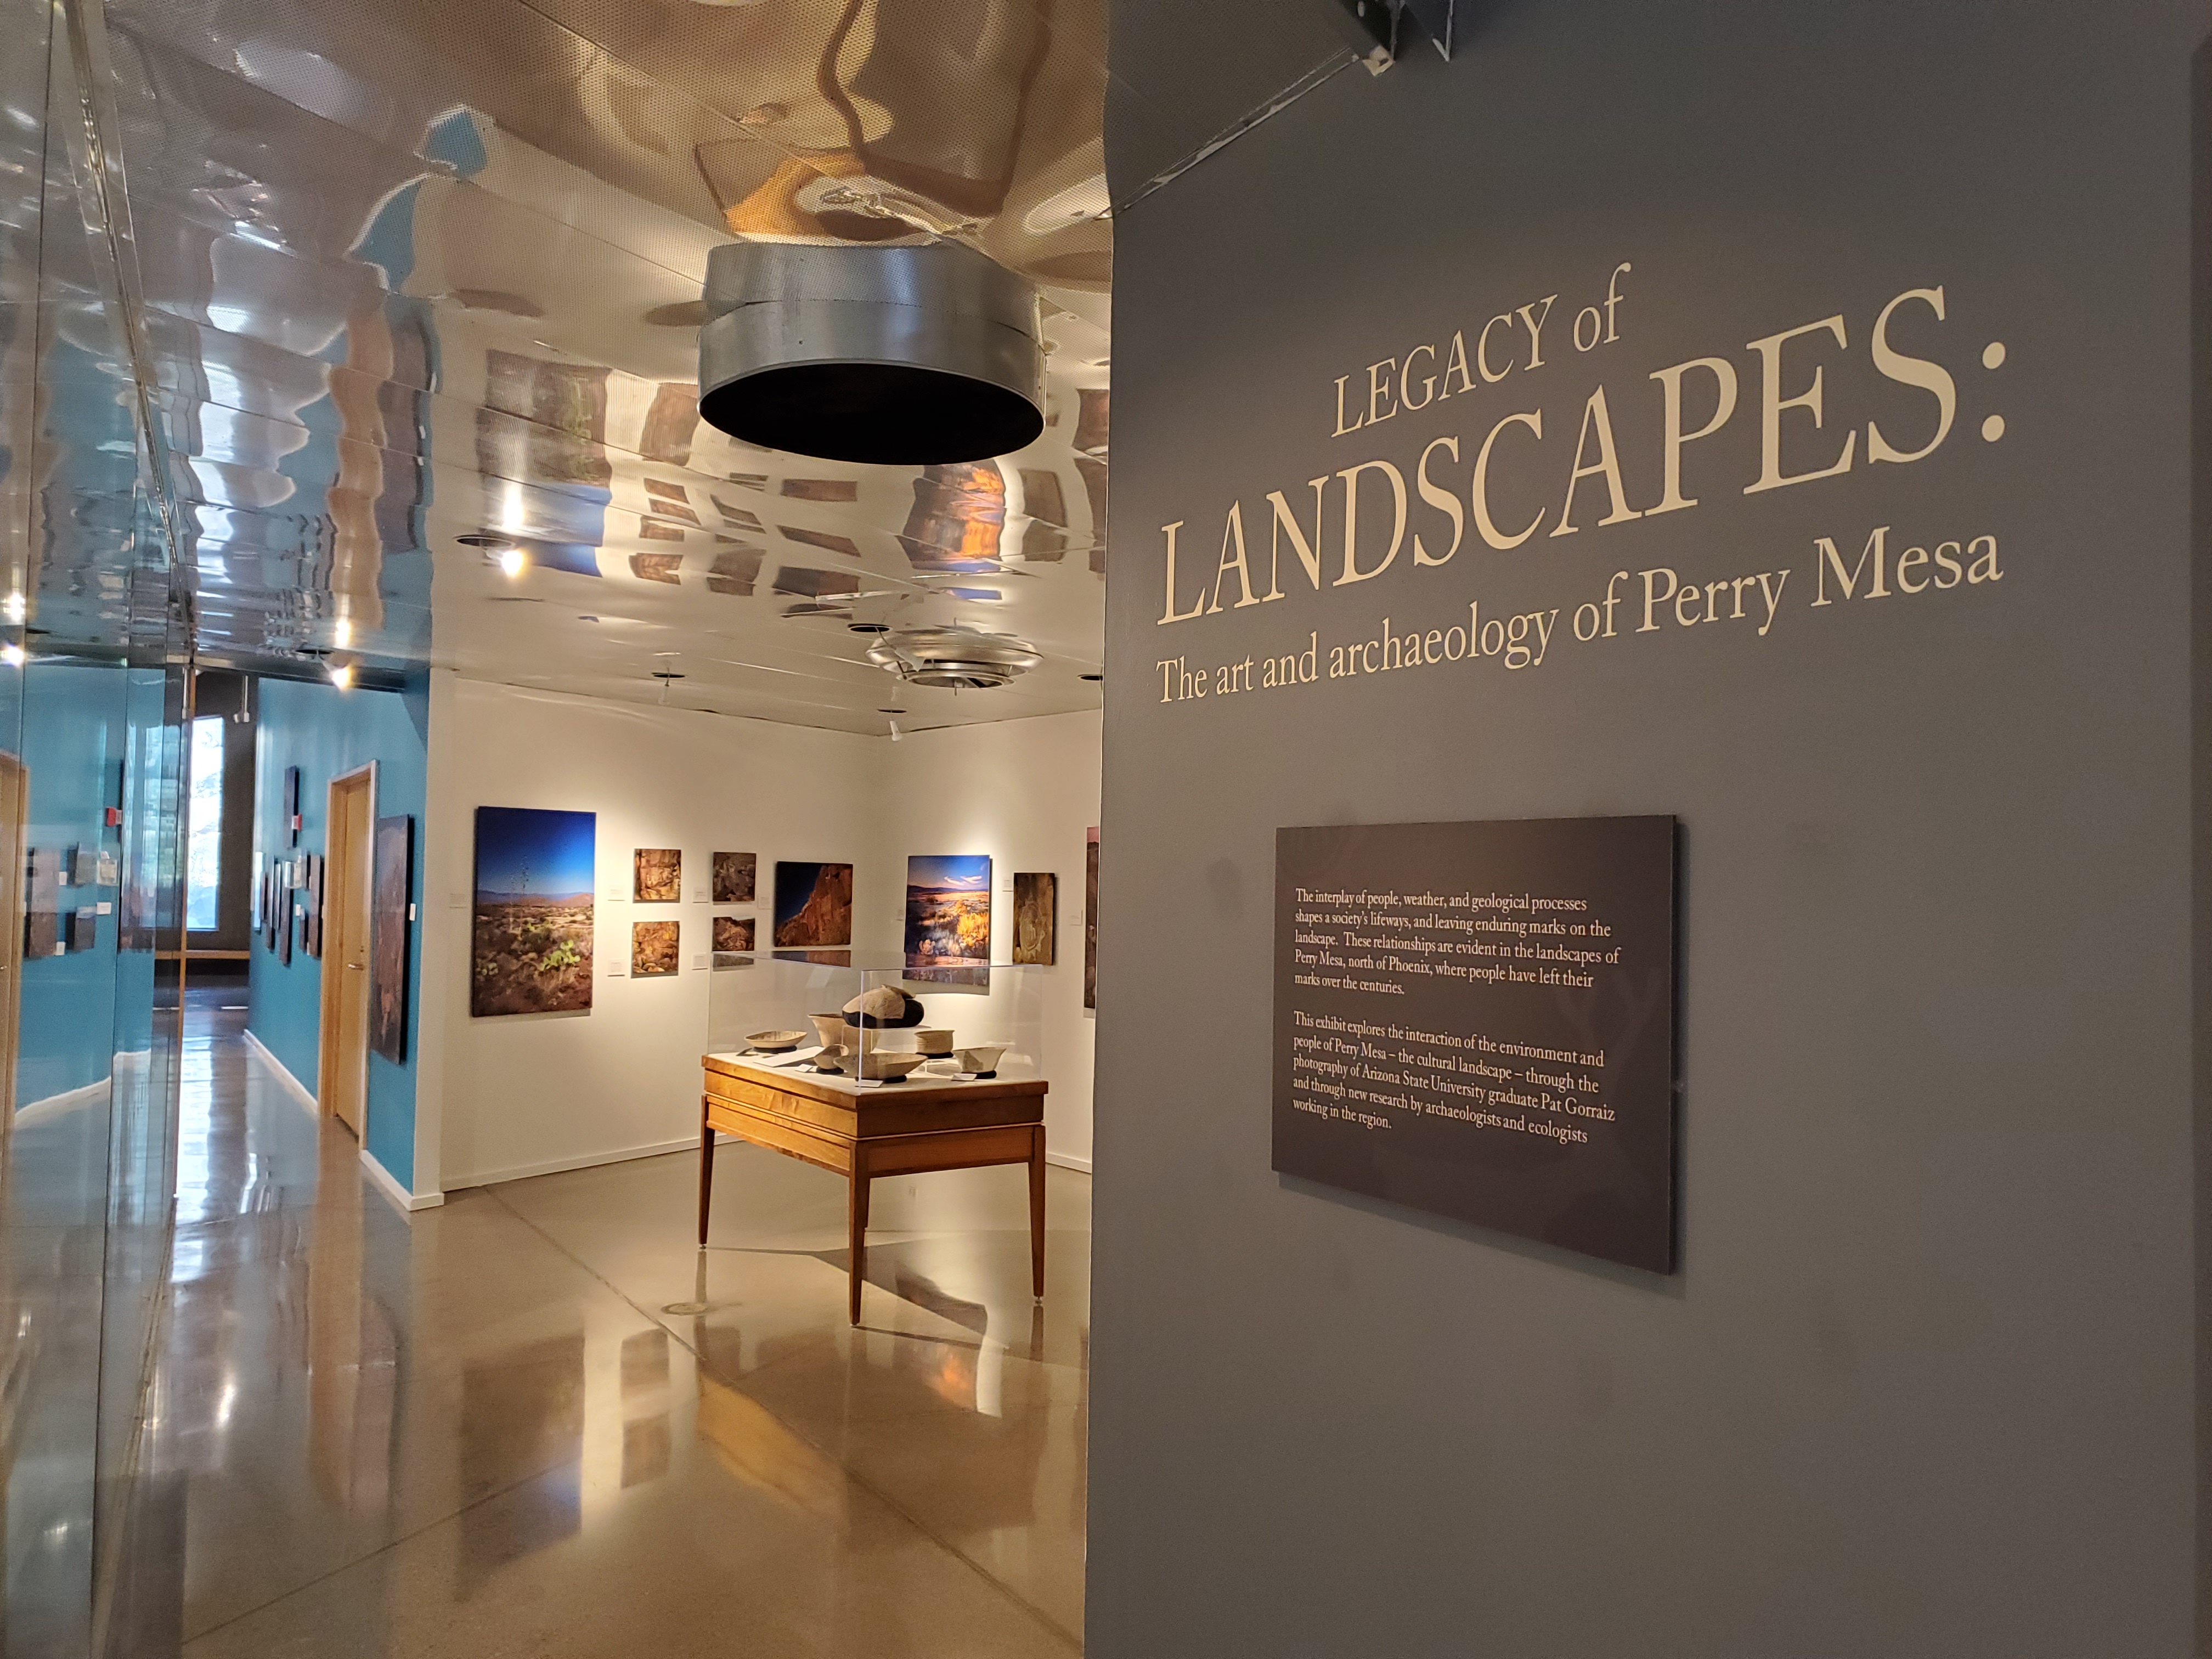 Entry way to temporary exhibit on Legacy of Landscapes: Art and Archaeology of Perry Mesa.